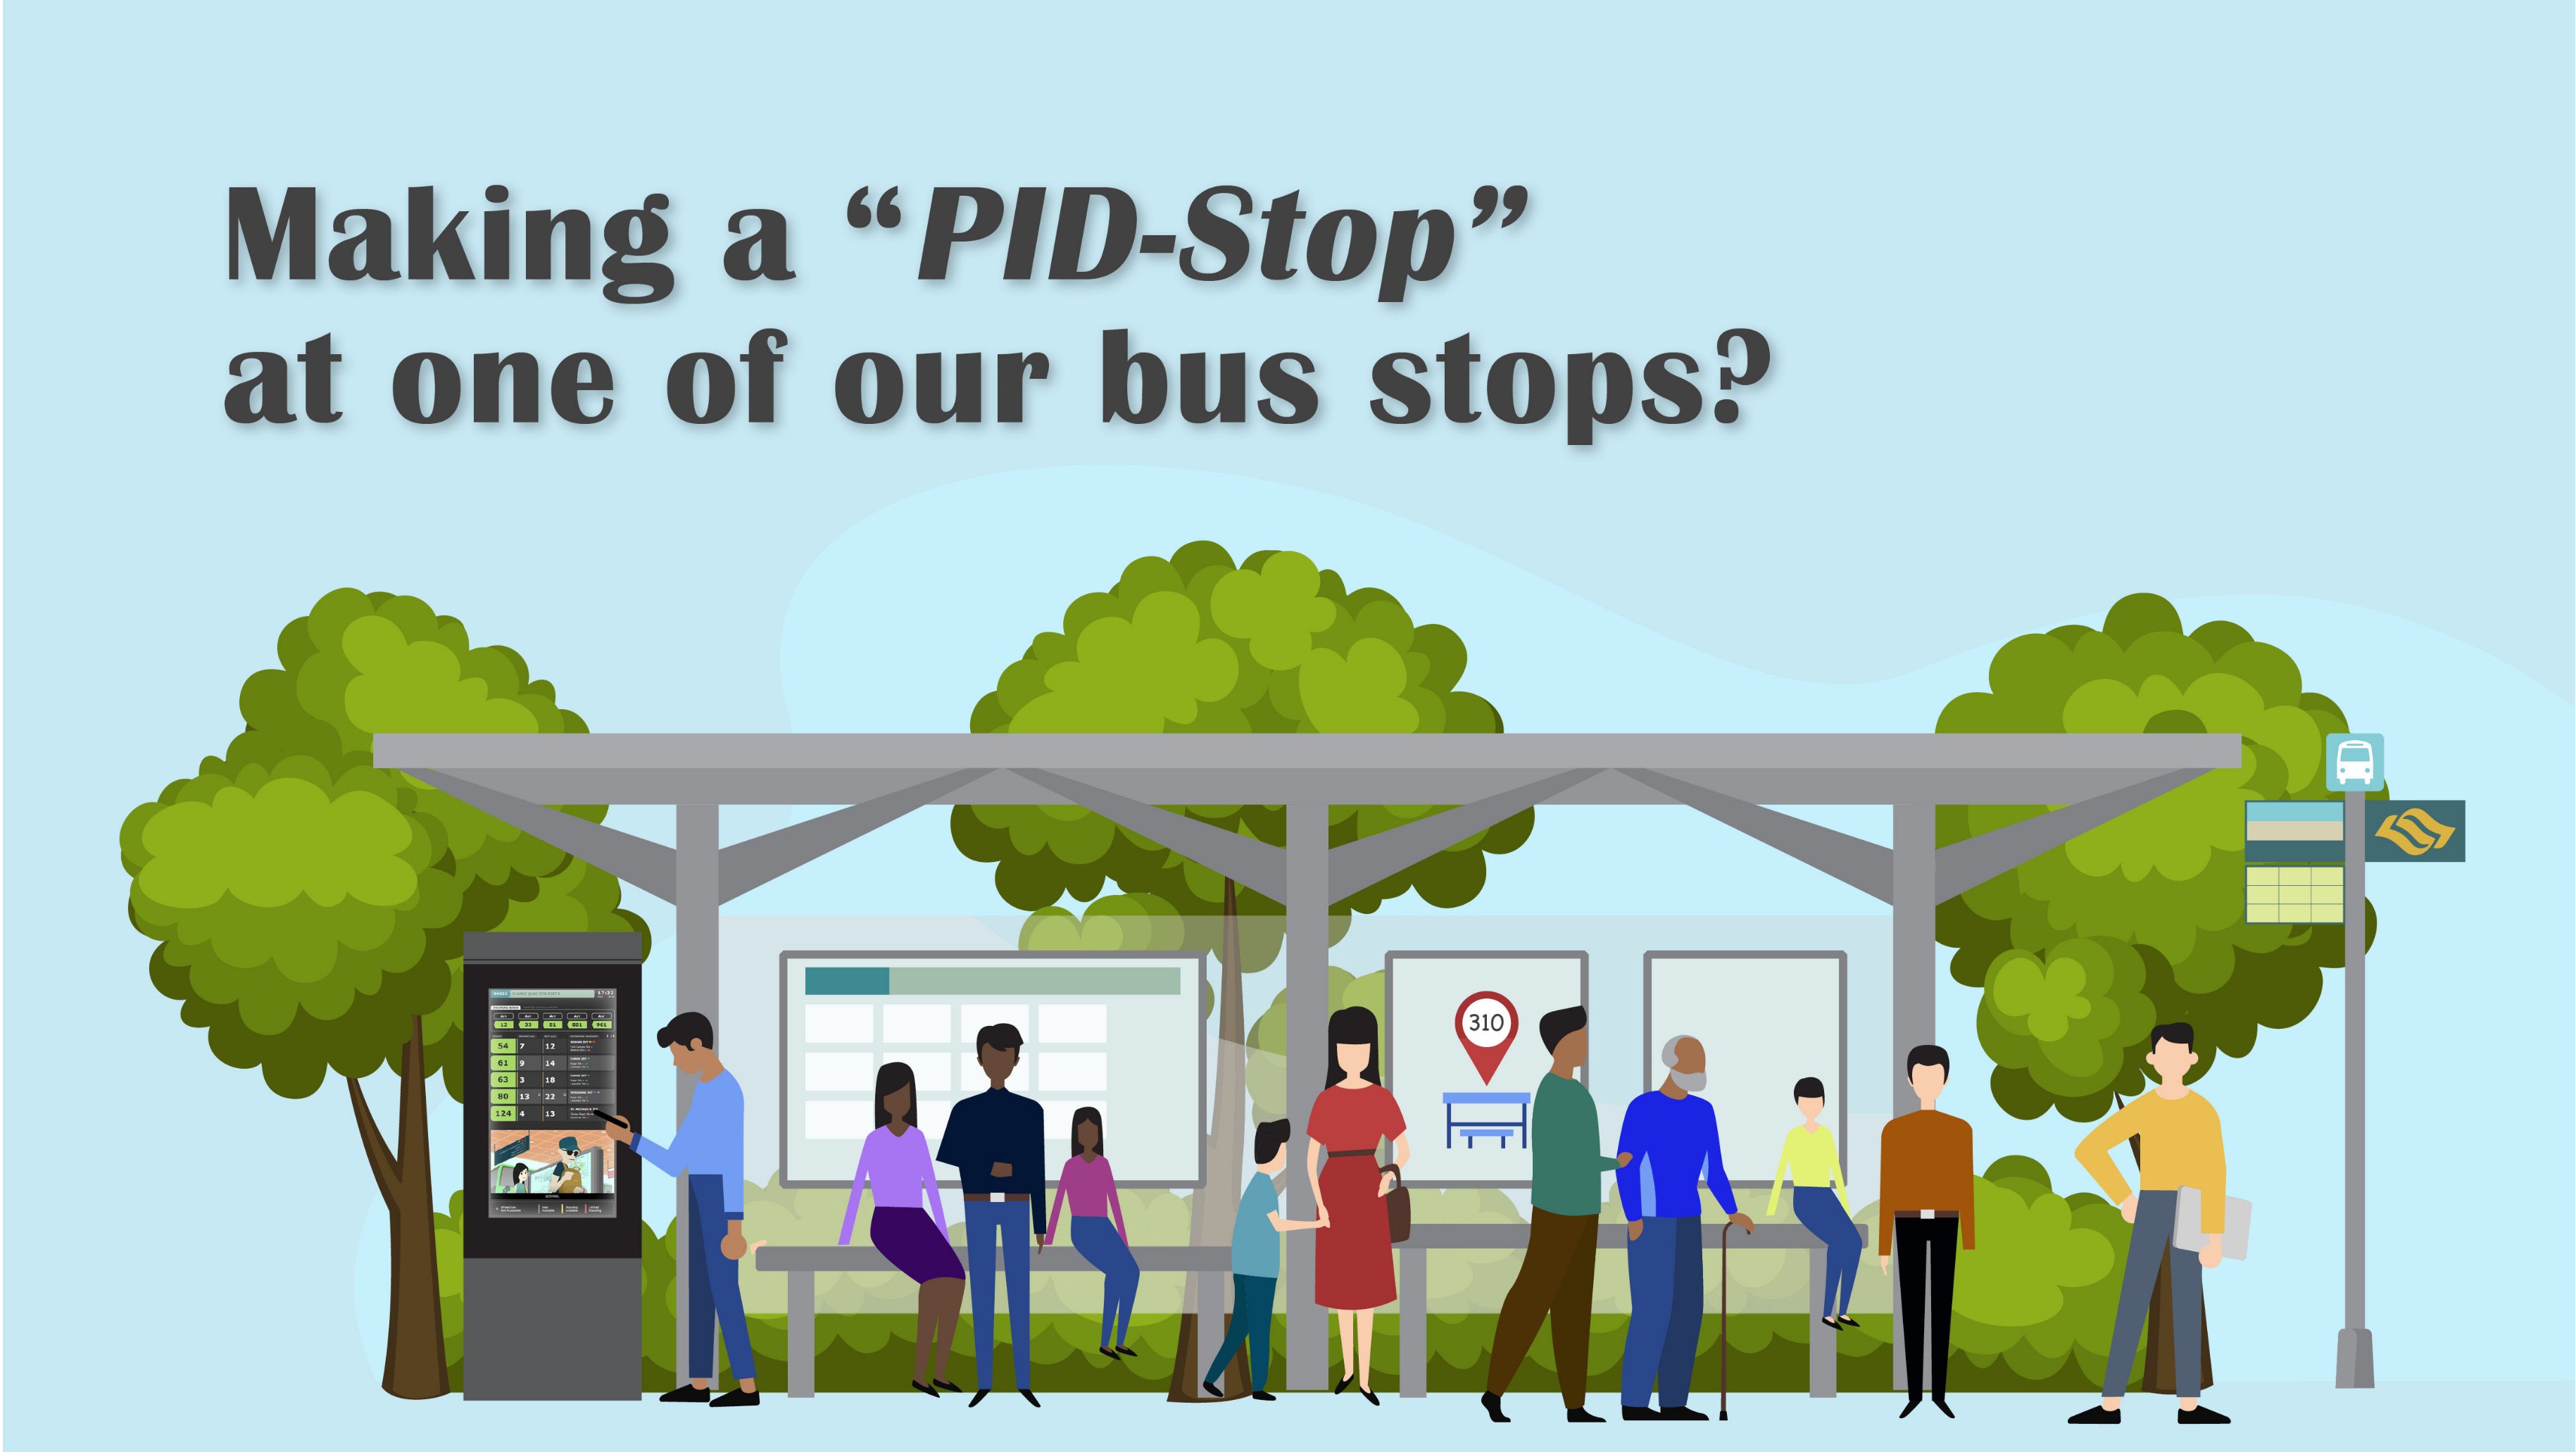 Image of bus stop with PIDS screen